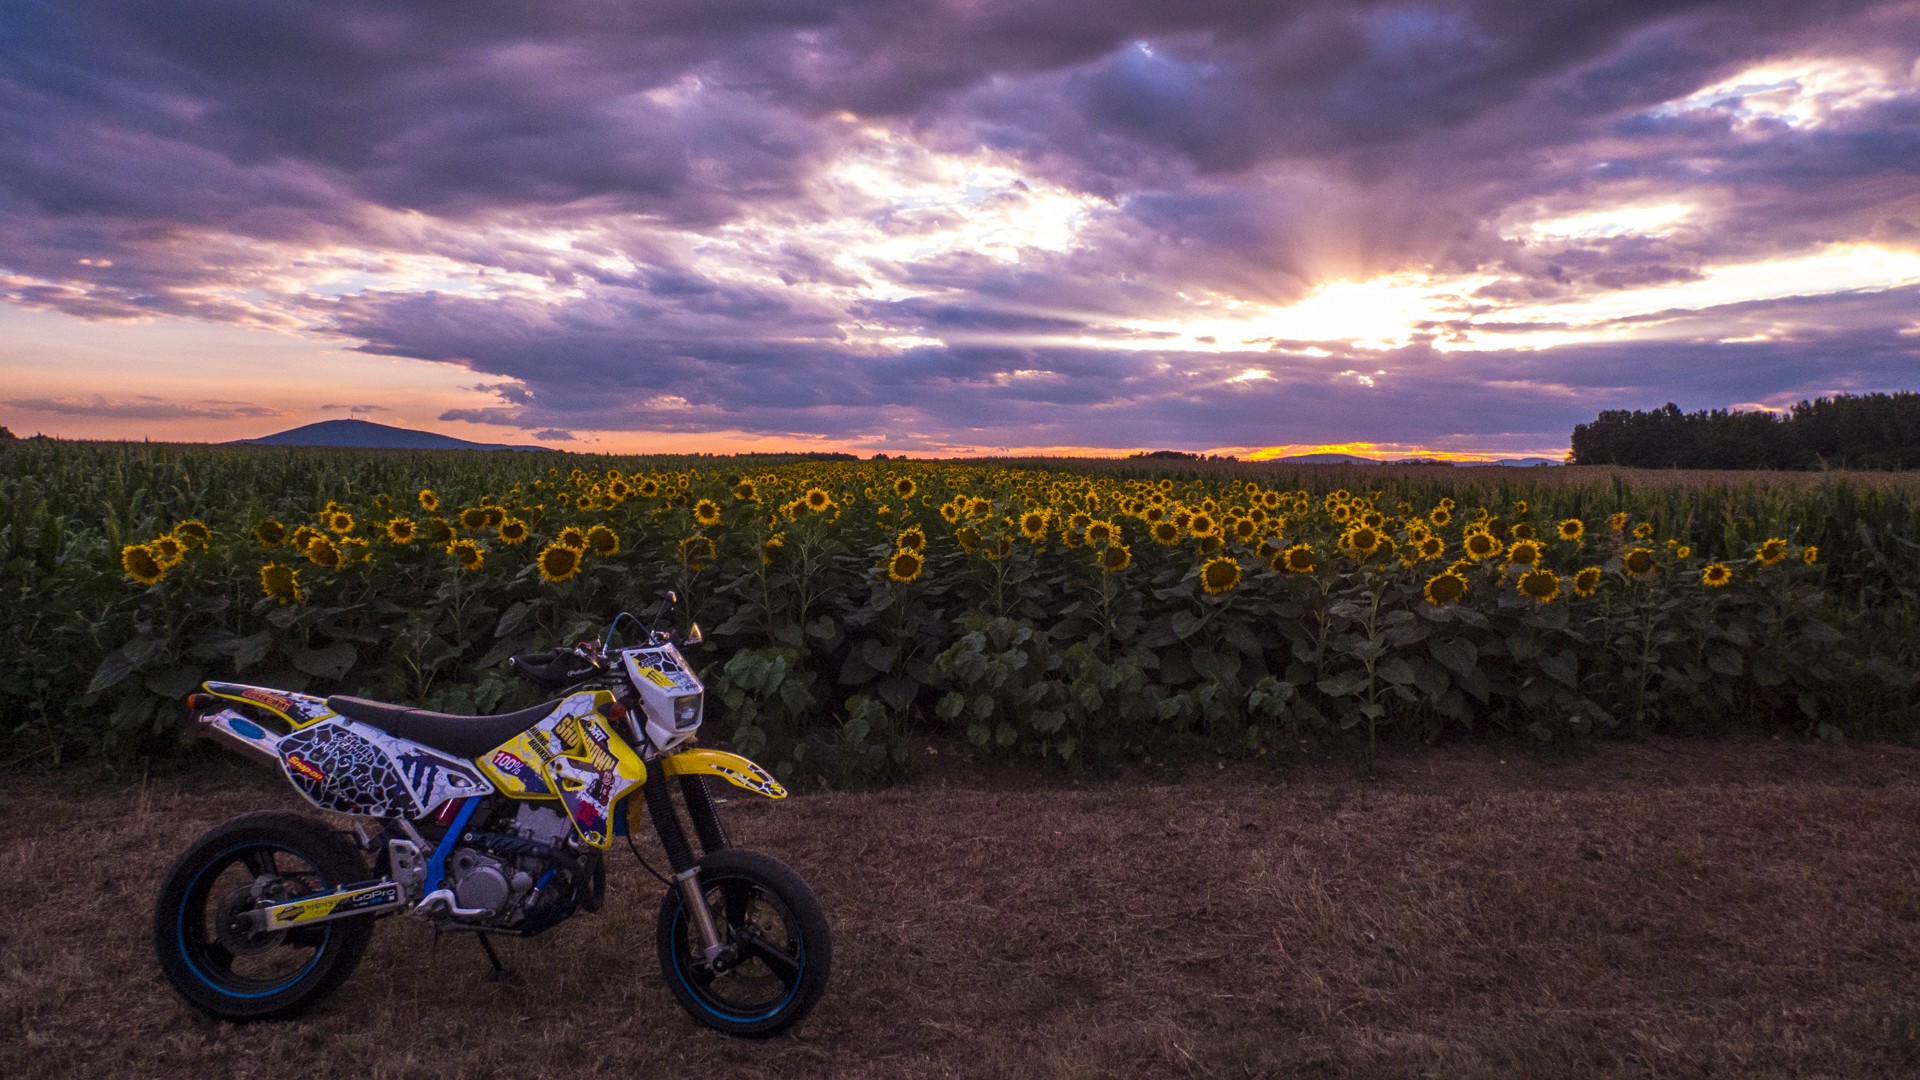 Drz 400 Sm, Monster Energy, Sunset Wallpapers Hd / - Suzuki Drz 400 Sm Wallpers , HD Wallpaper & Backgrounds